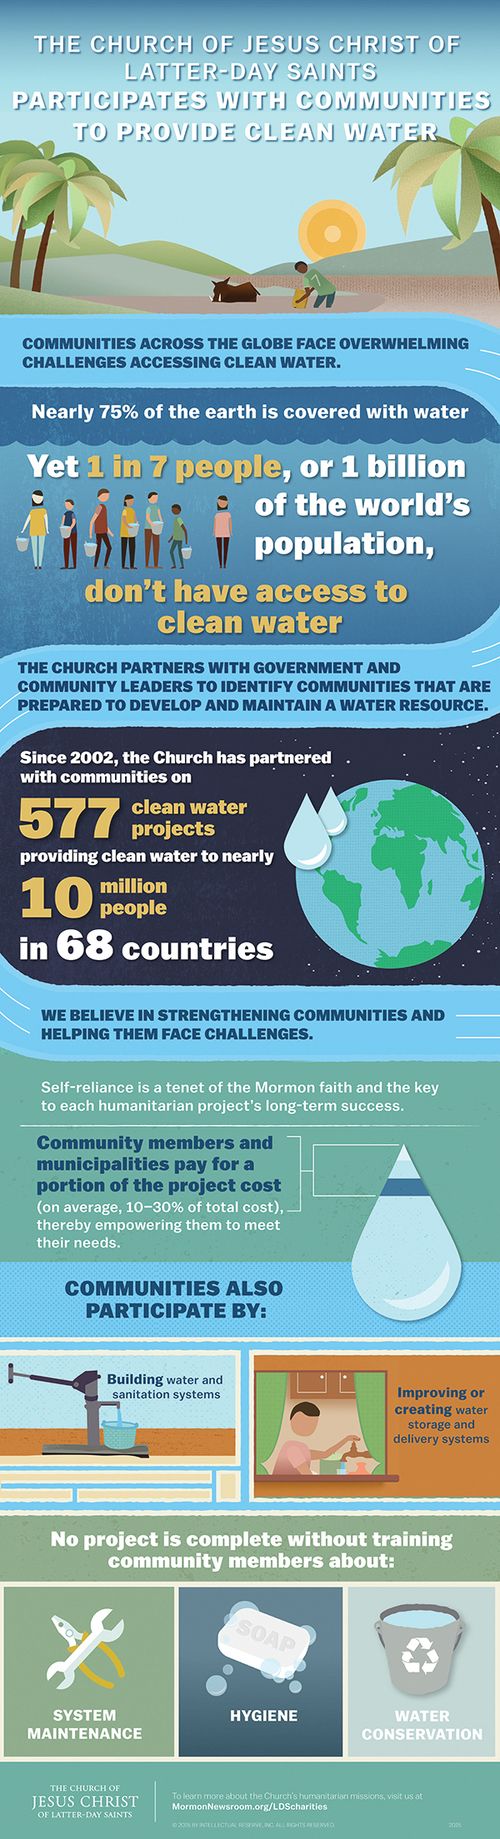 An infographic describing the Latter-day Saint humanitarian efforts to provide communities with clean water. Learn more at mormonnewsroom.org.